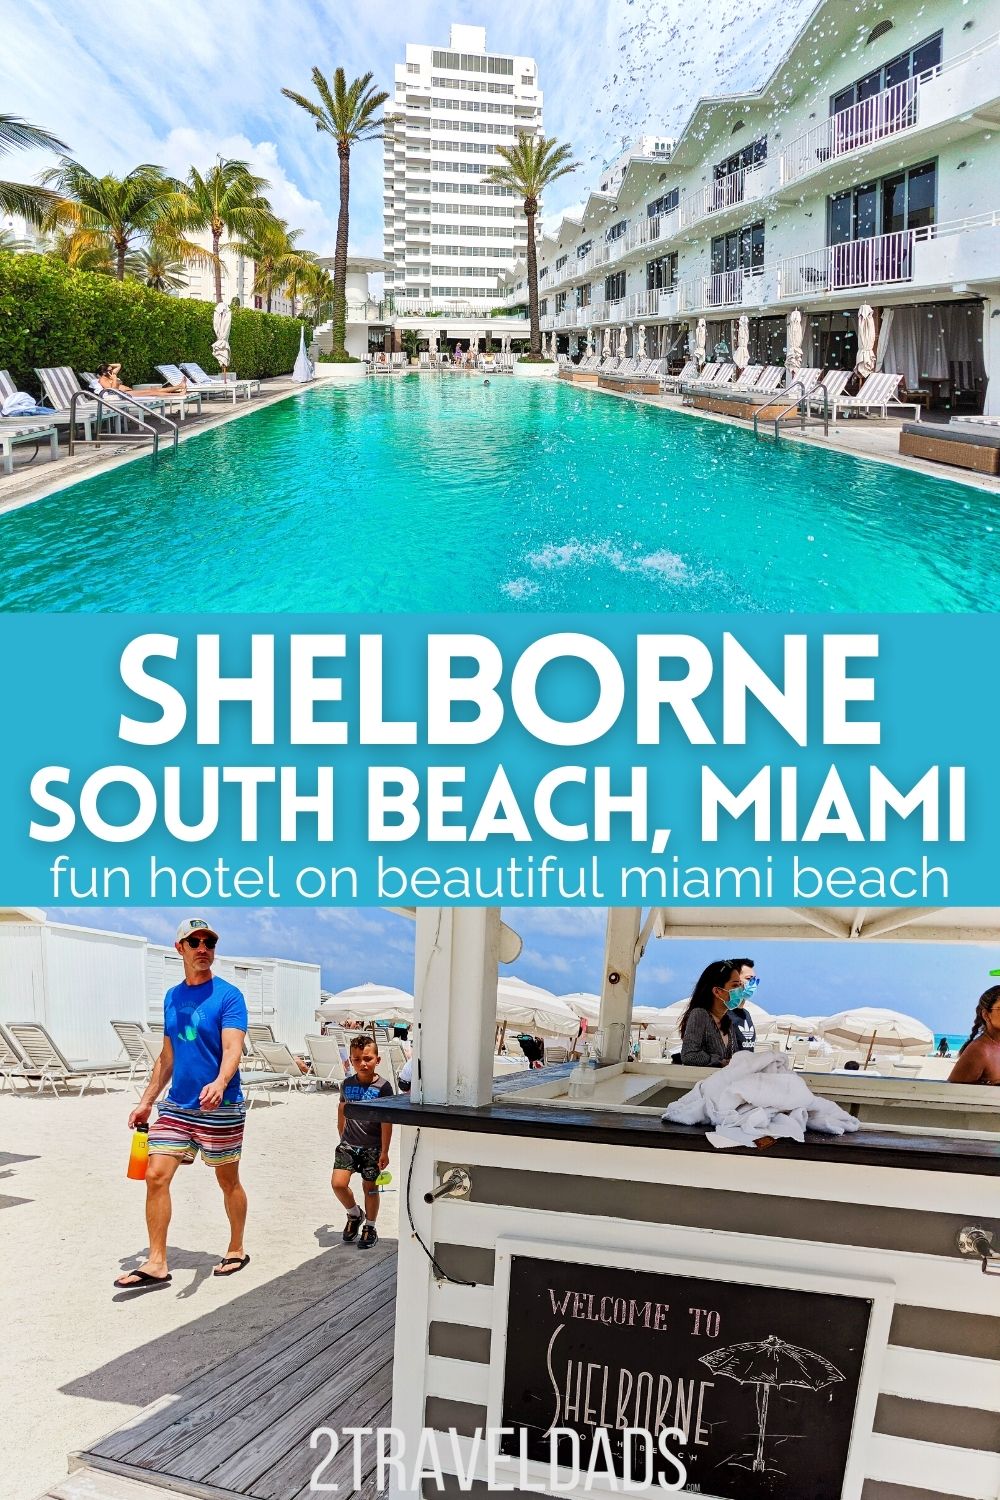 Review of the Shelborn South Beach hotel in Miami, including things to do and dining recommendations in the Art Deco District of Miami Beach. Tips for planning a fun weekend getaway to the Shelborne on the beach.